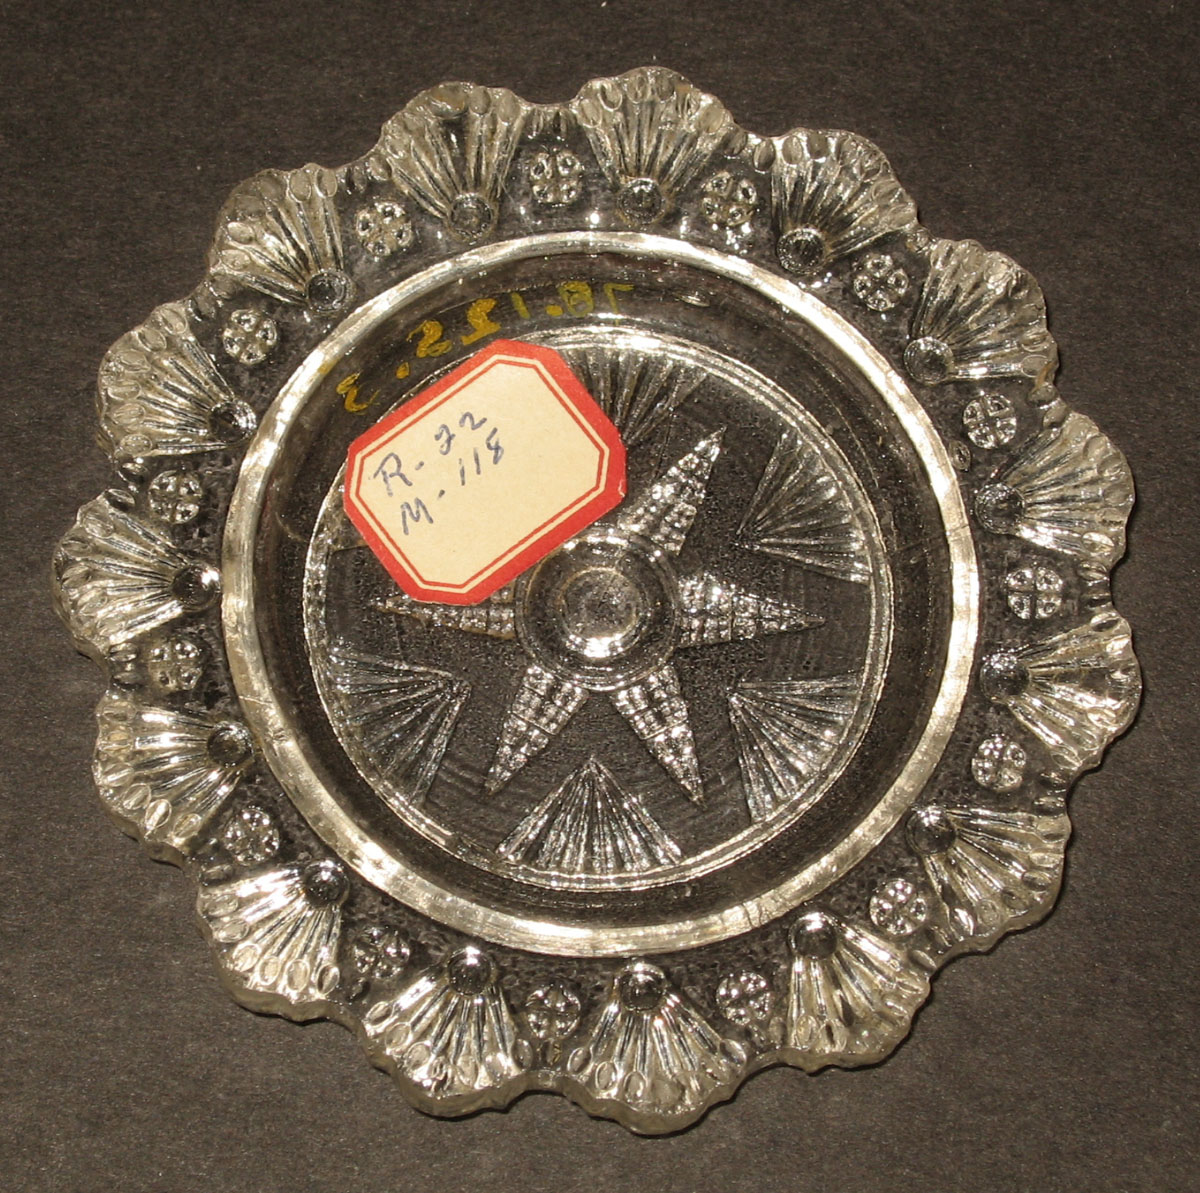 1978.0125.003 Glass cup plate